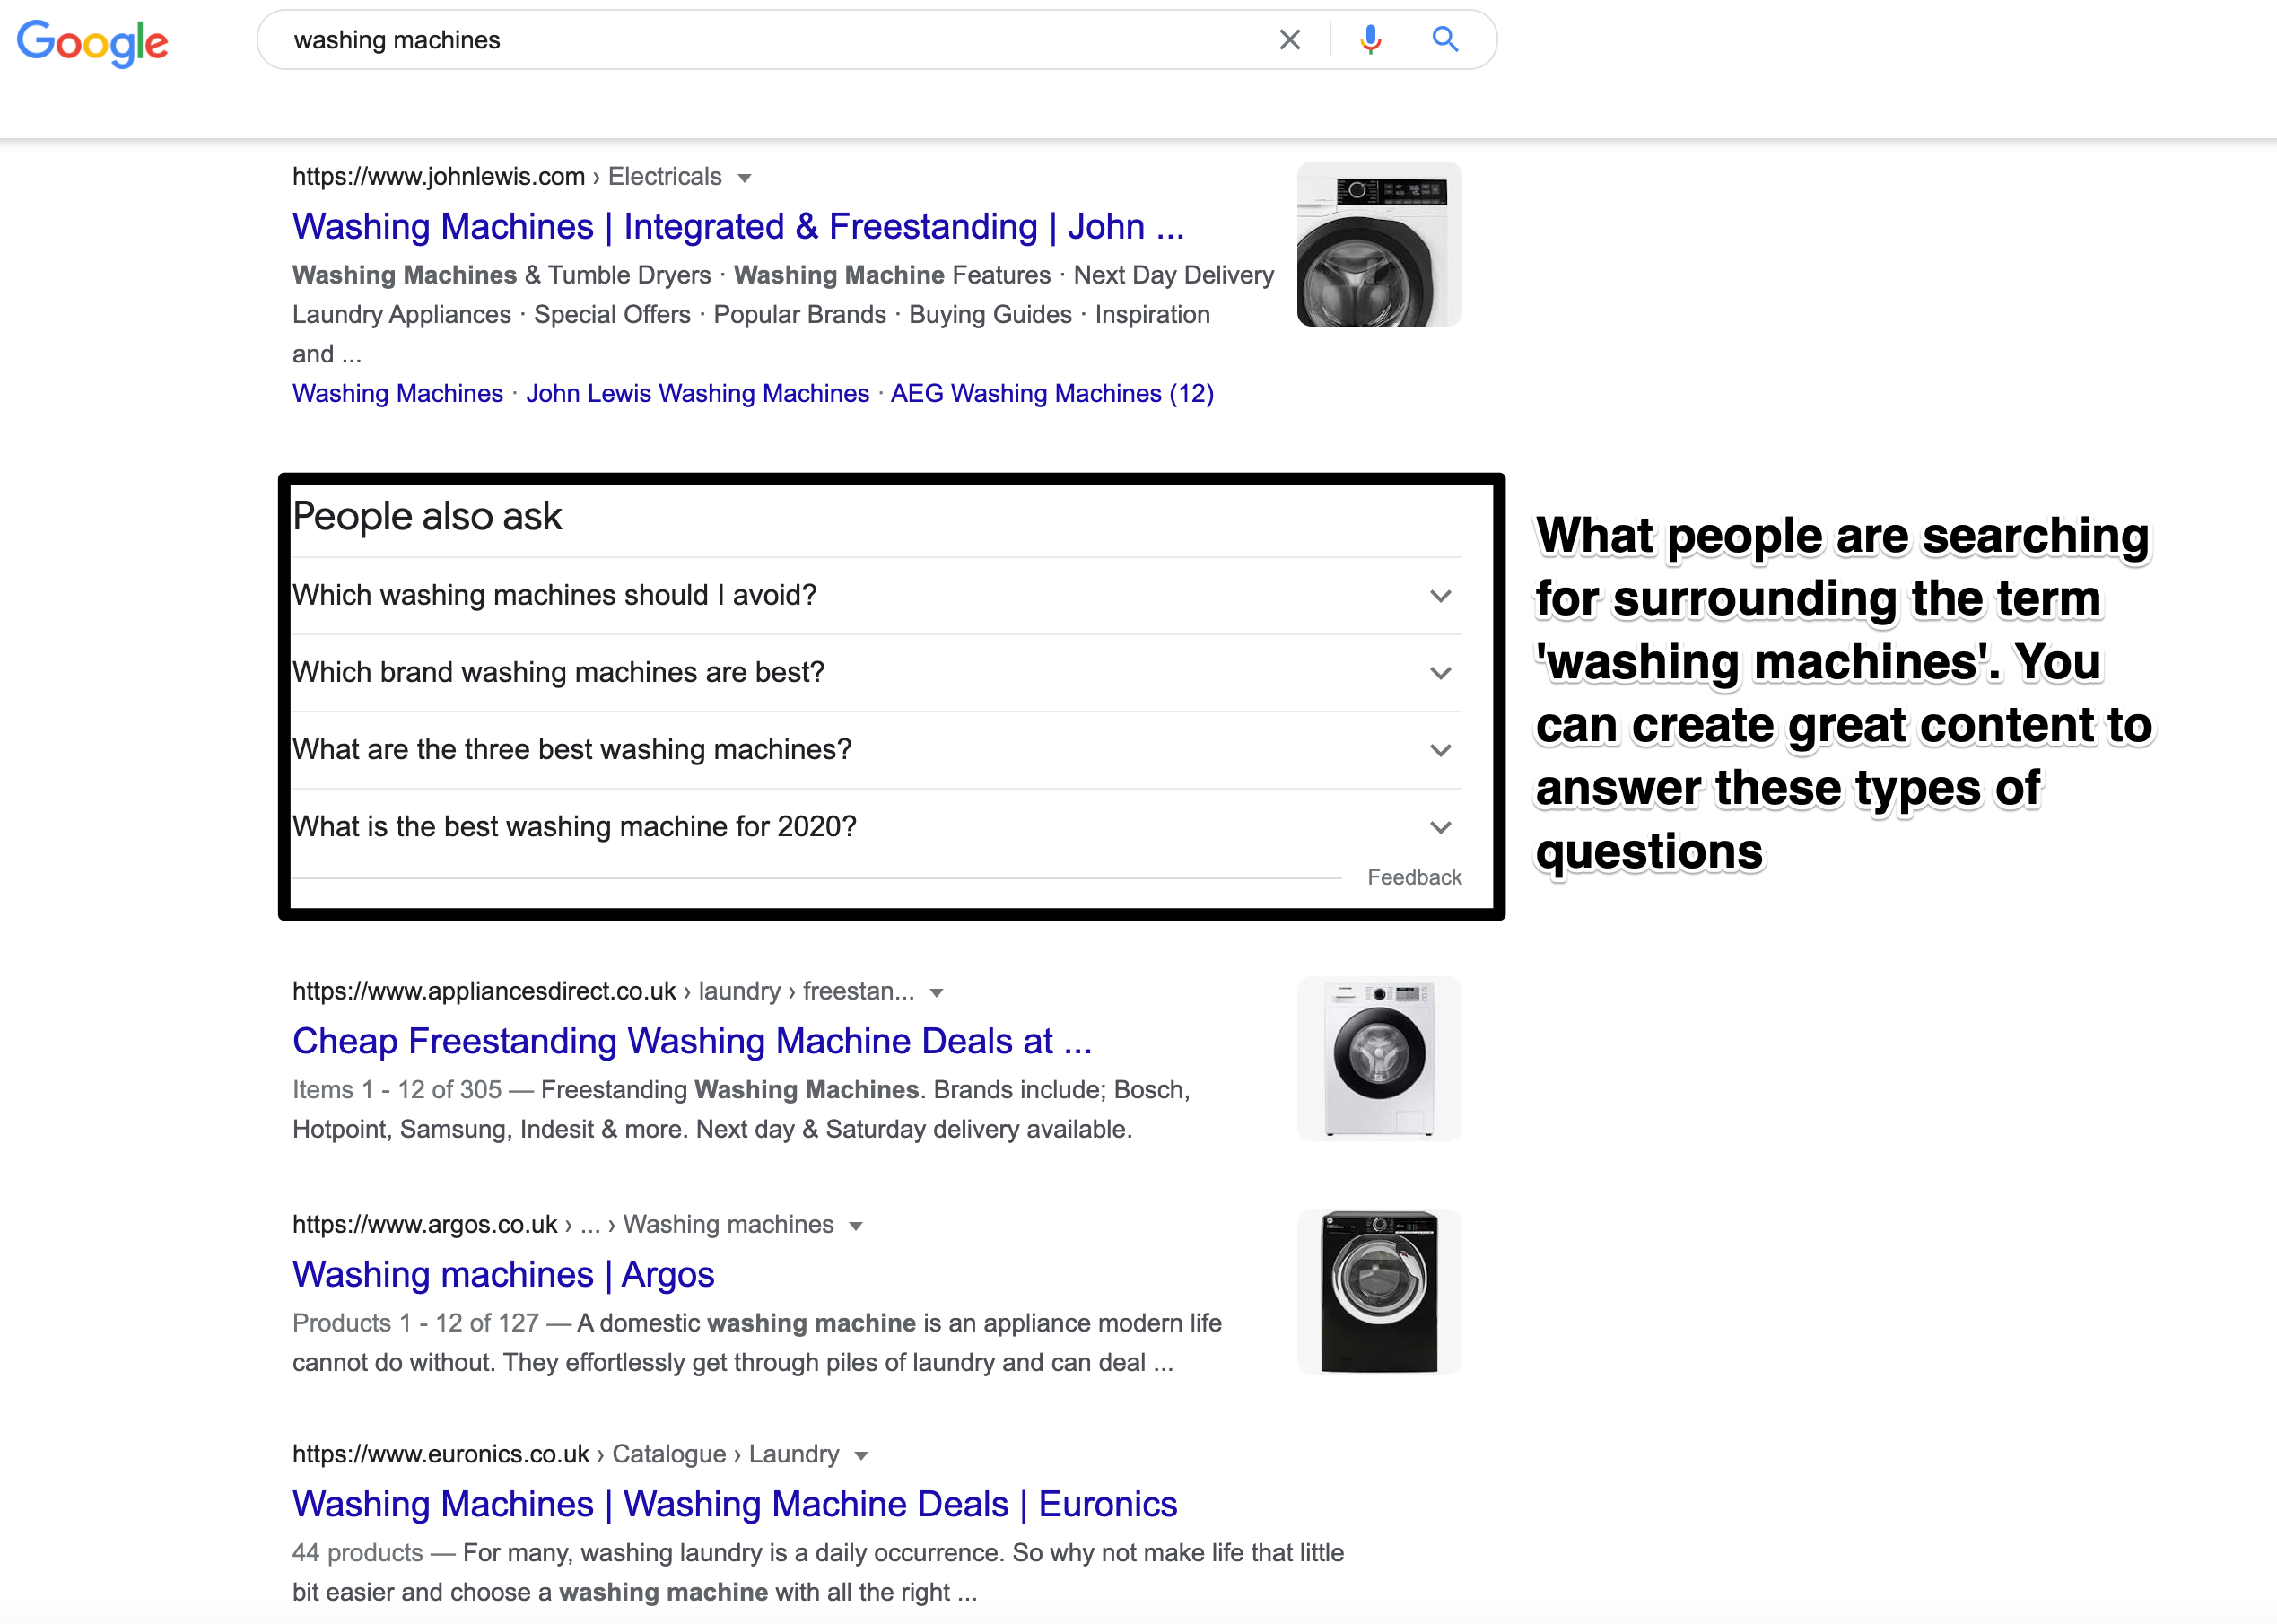 Image showing Google recommending other search queries that people are looking for related to a keyword